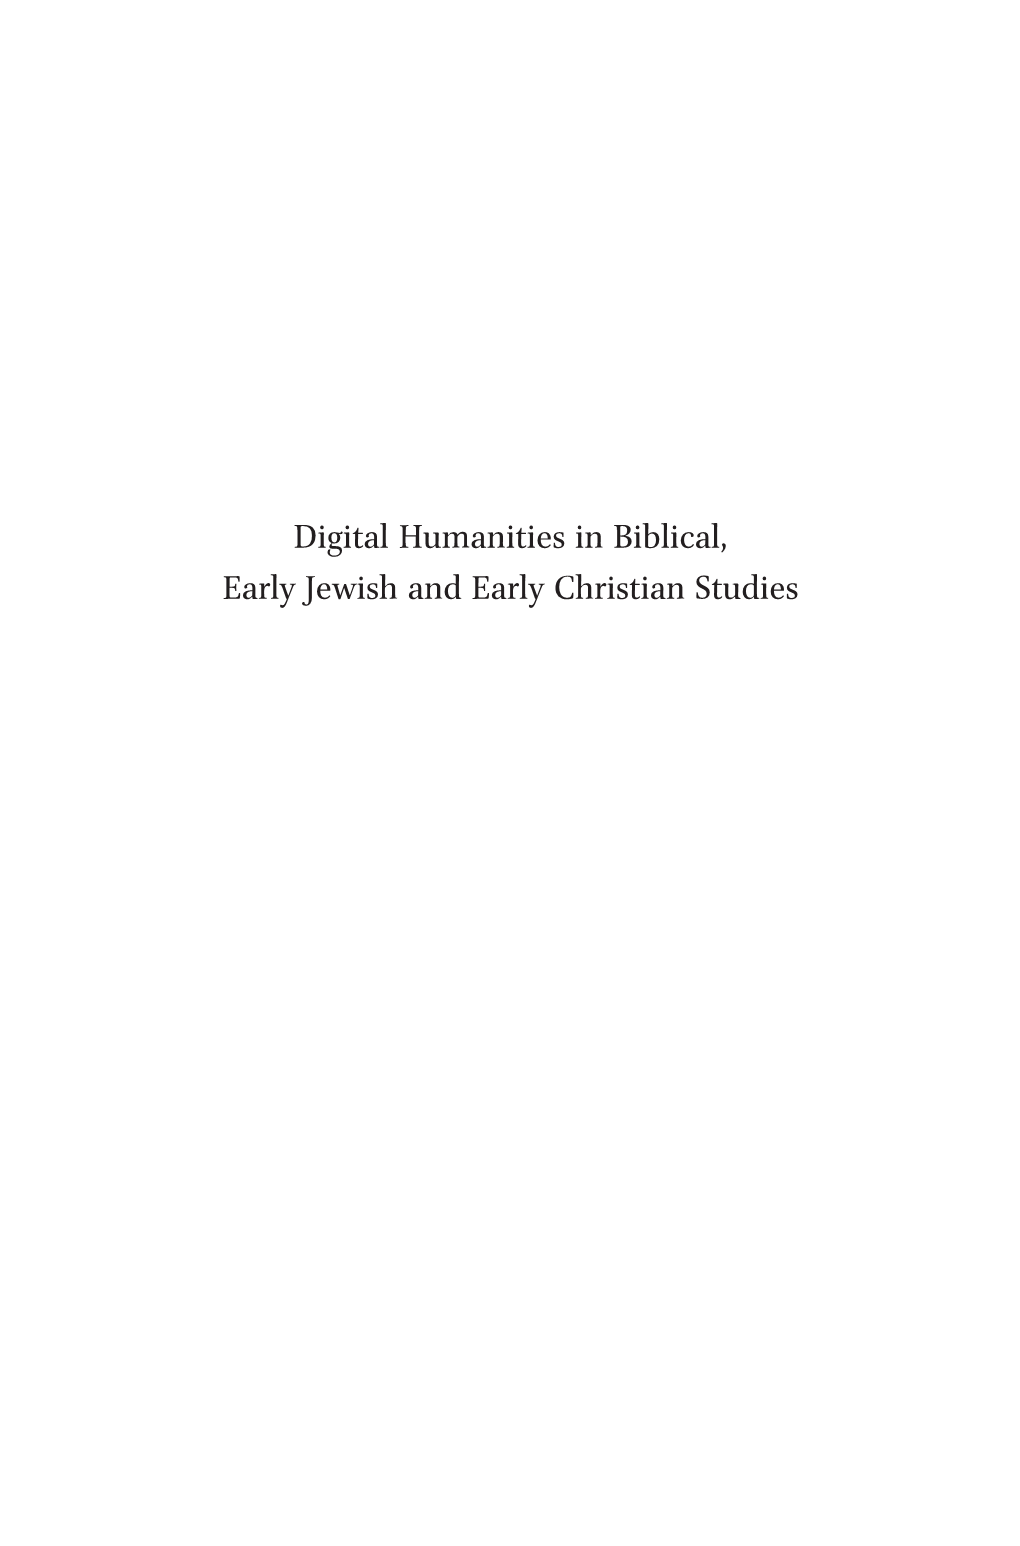 Digital Humanities in Biblical, Early Jewish and Early Christian Studies Scholarly Communication